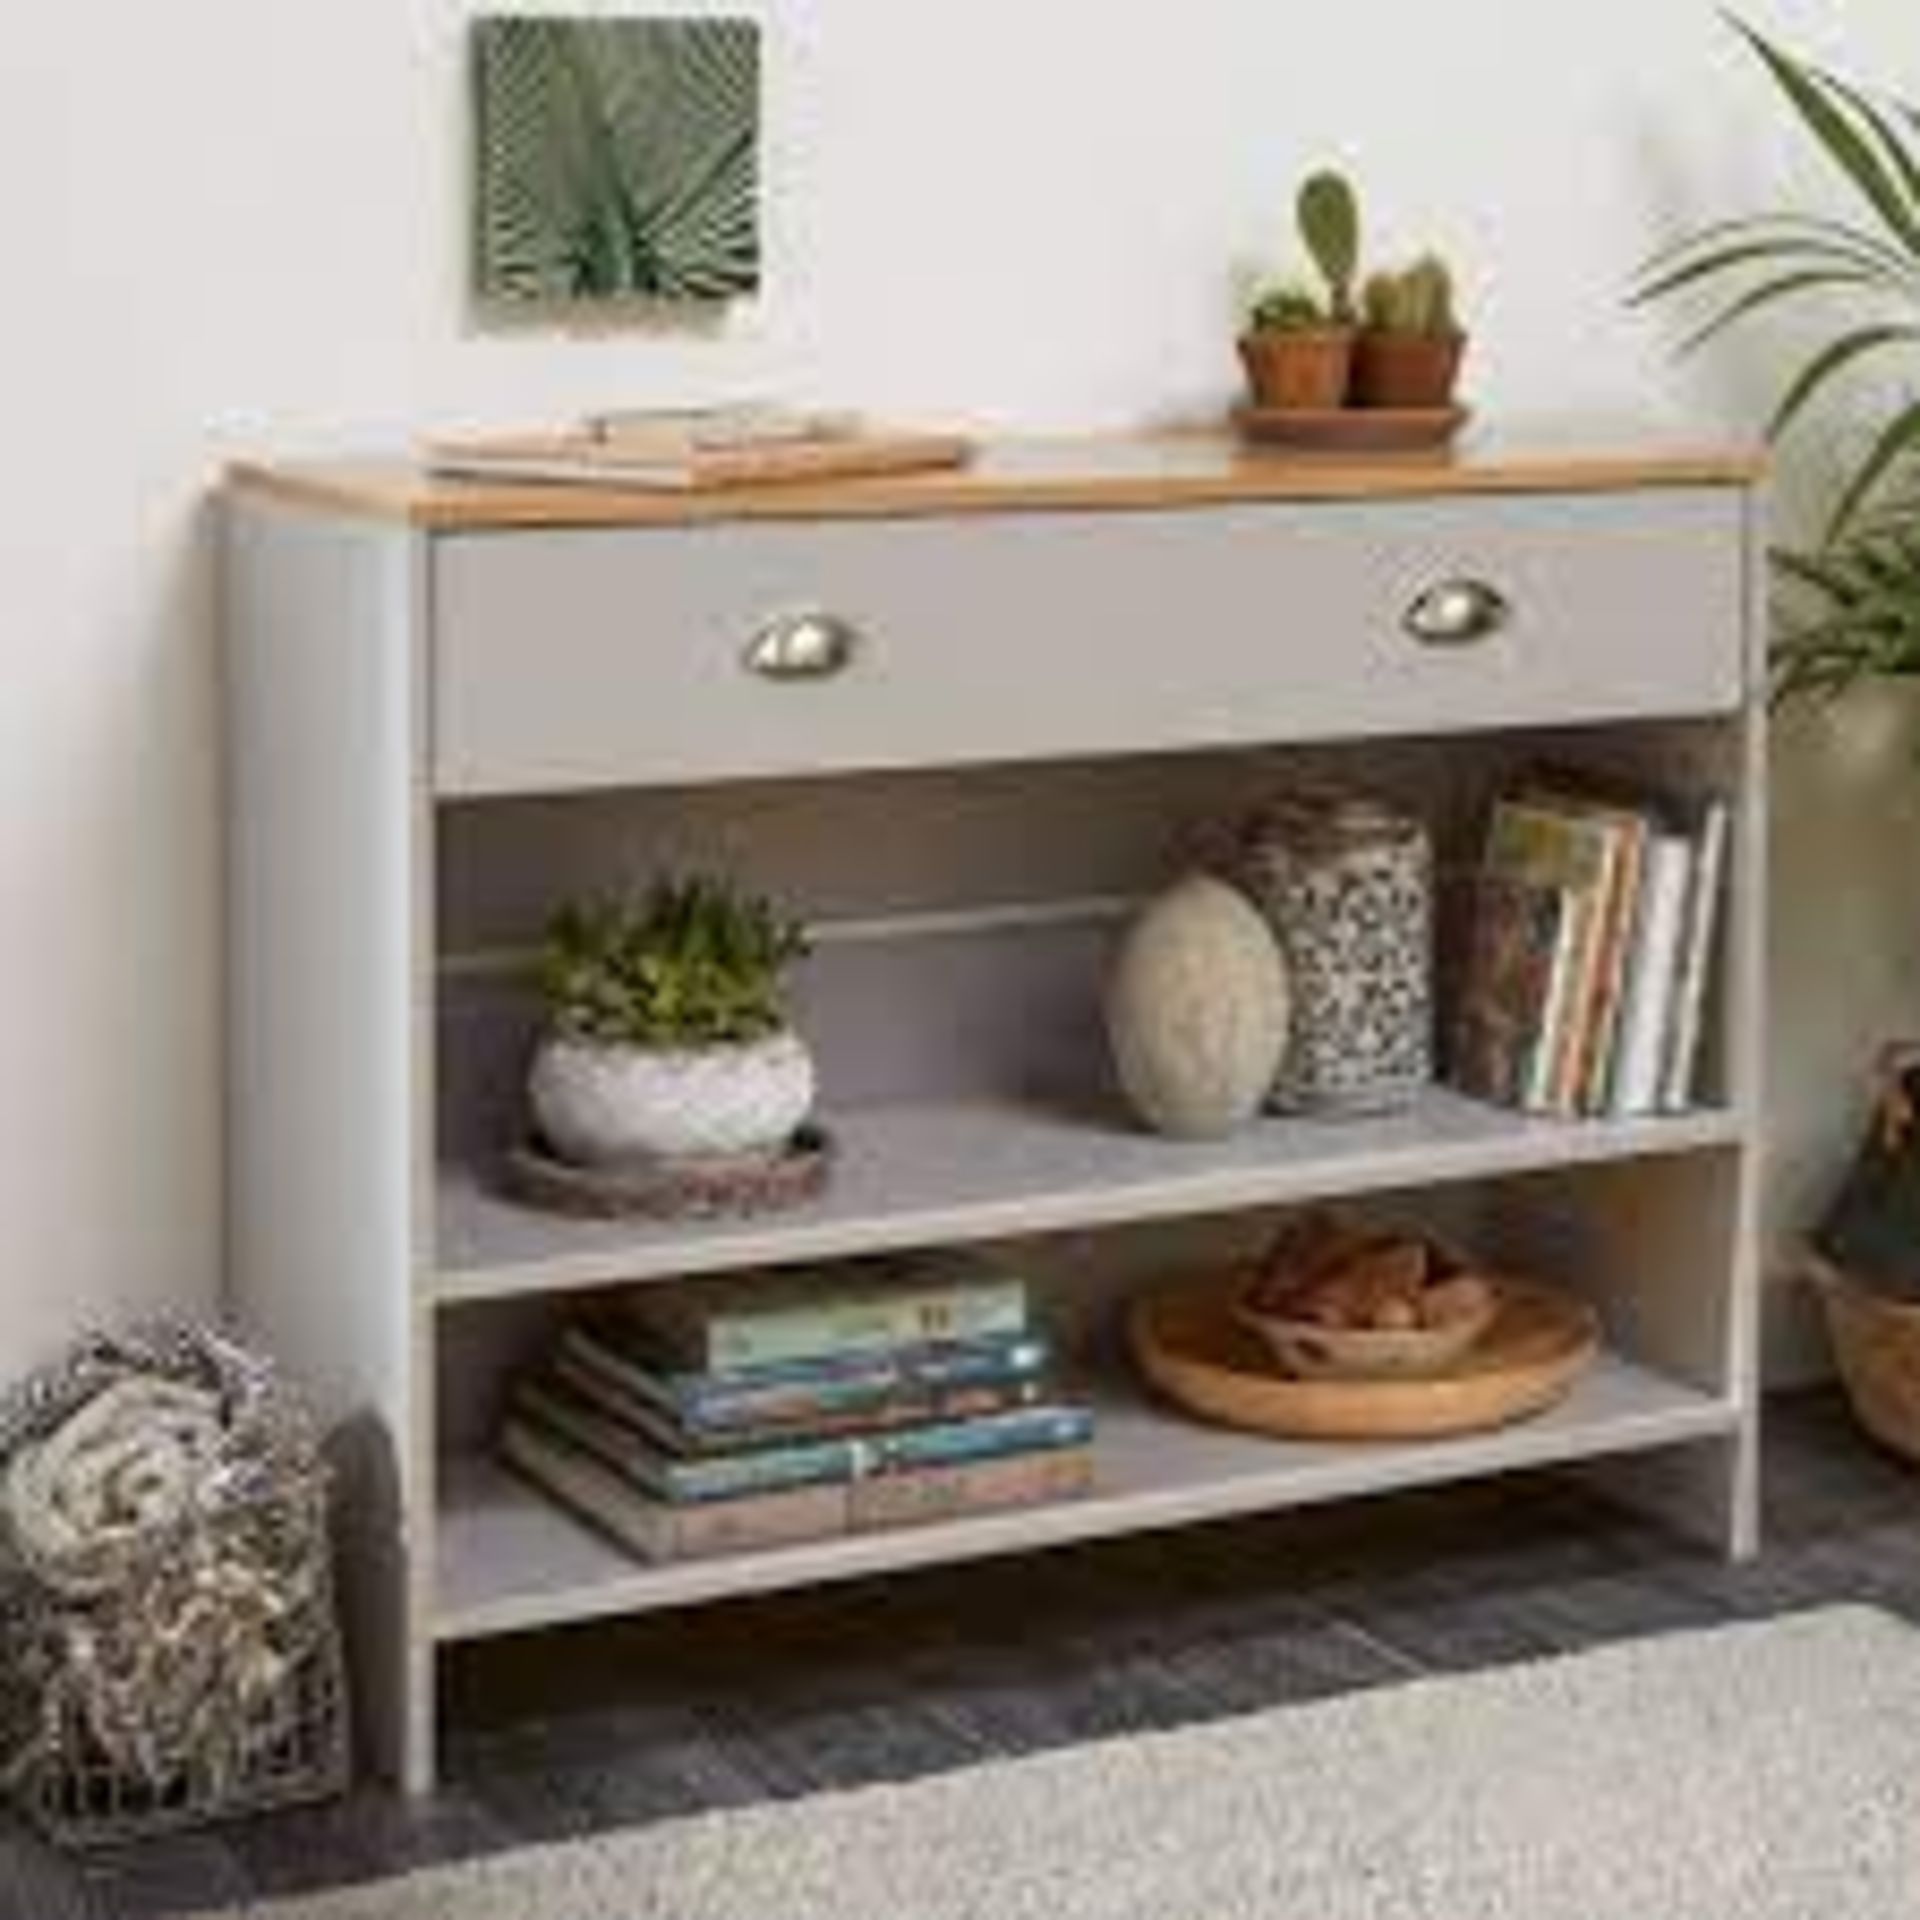 Lilsbury Grey Console Unit. - SR4. Lilsbury Console in grey and oak is the perfect addition to any